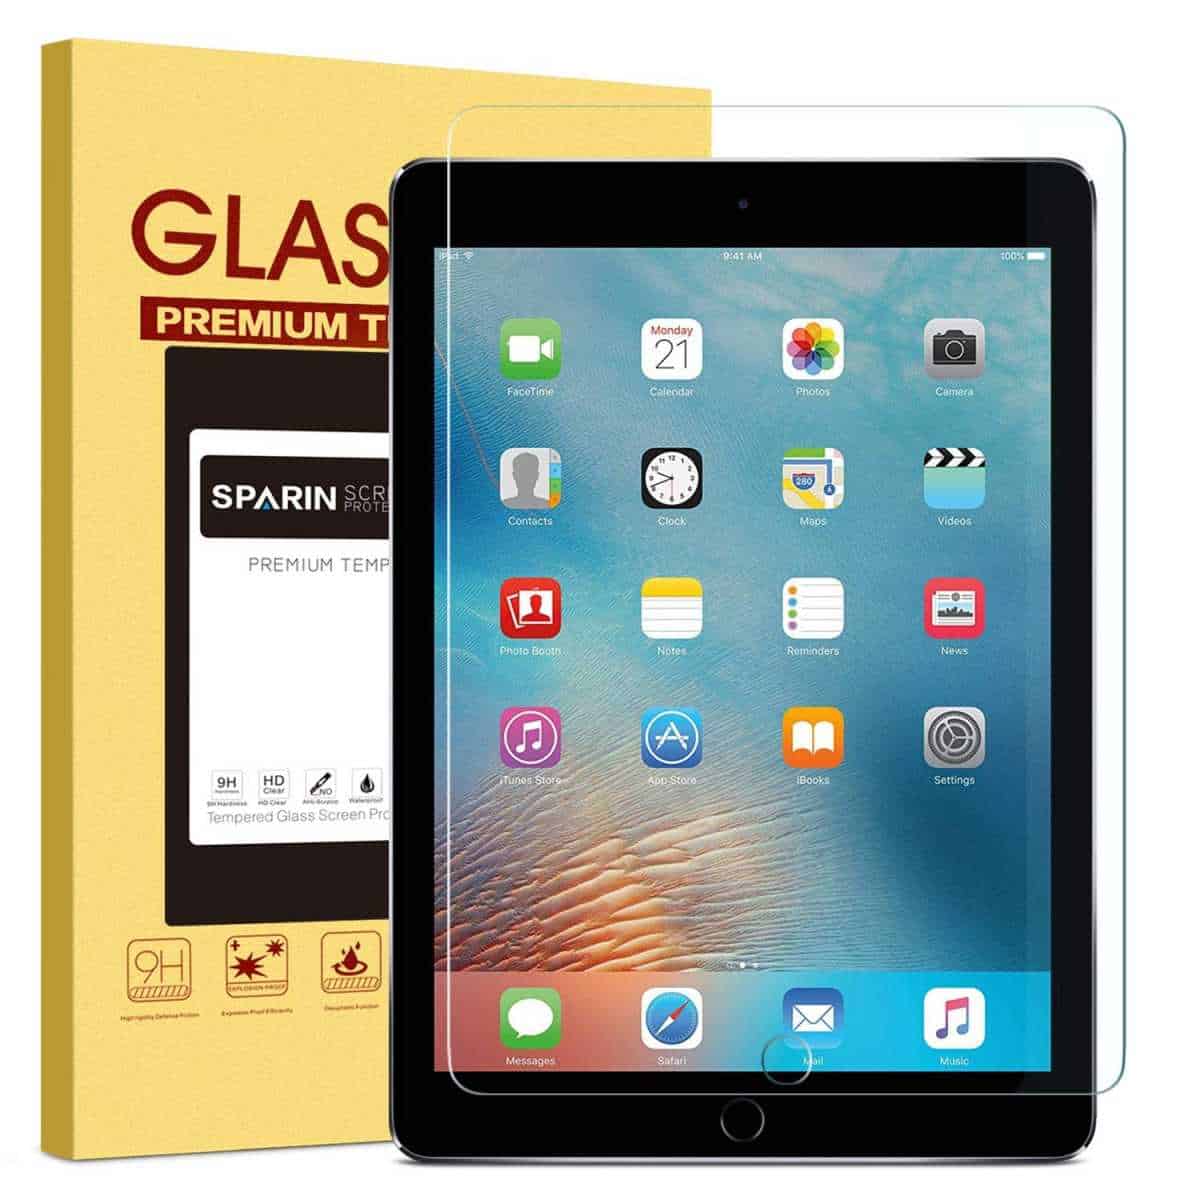 Sparin Tempered Glass Screen Protector | Essential iPad Accessories